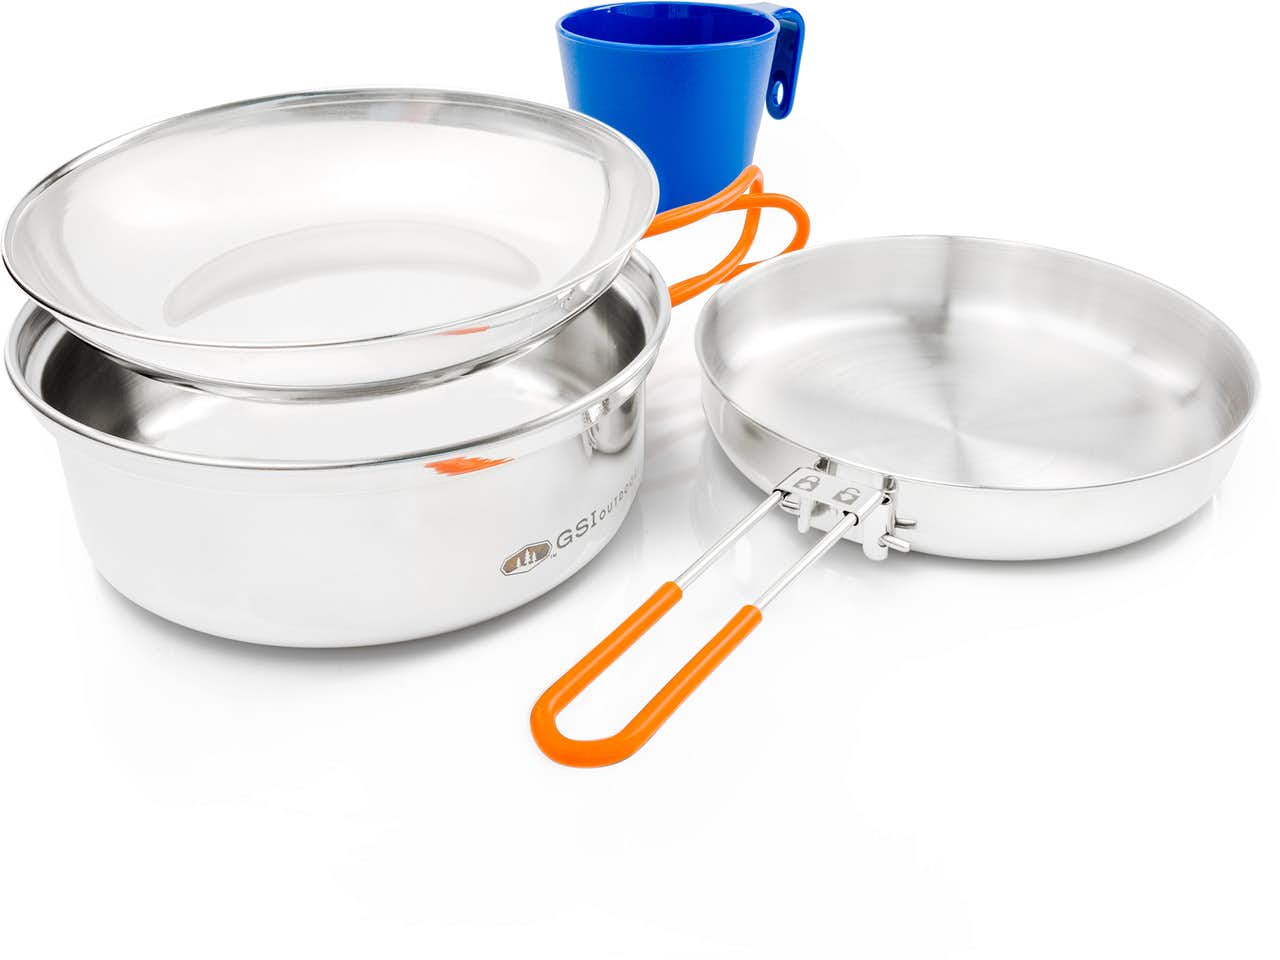 Glacier Stainless 1 Person Mess Kit Silver